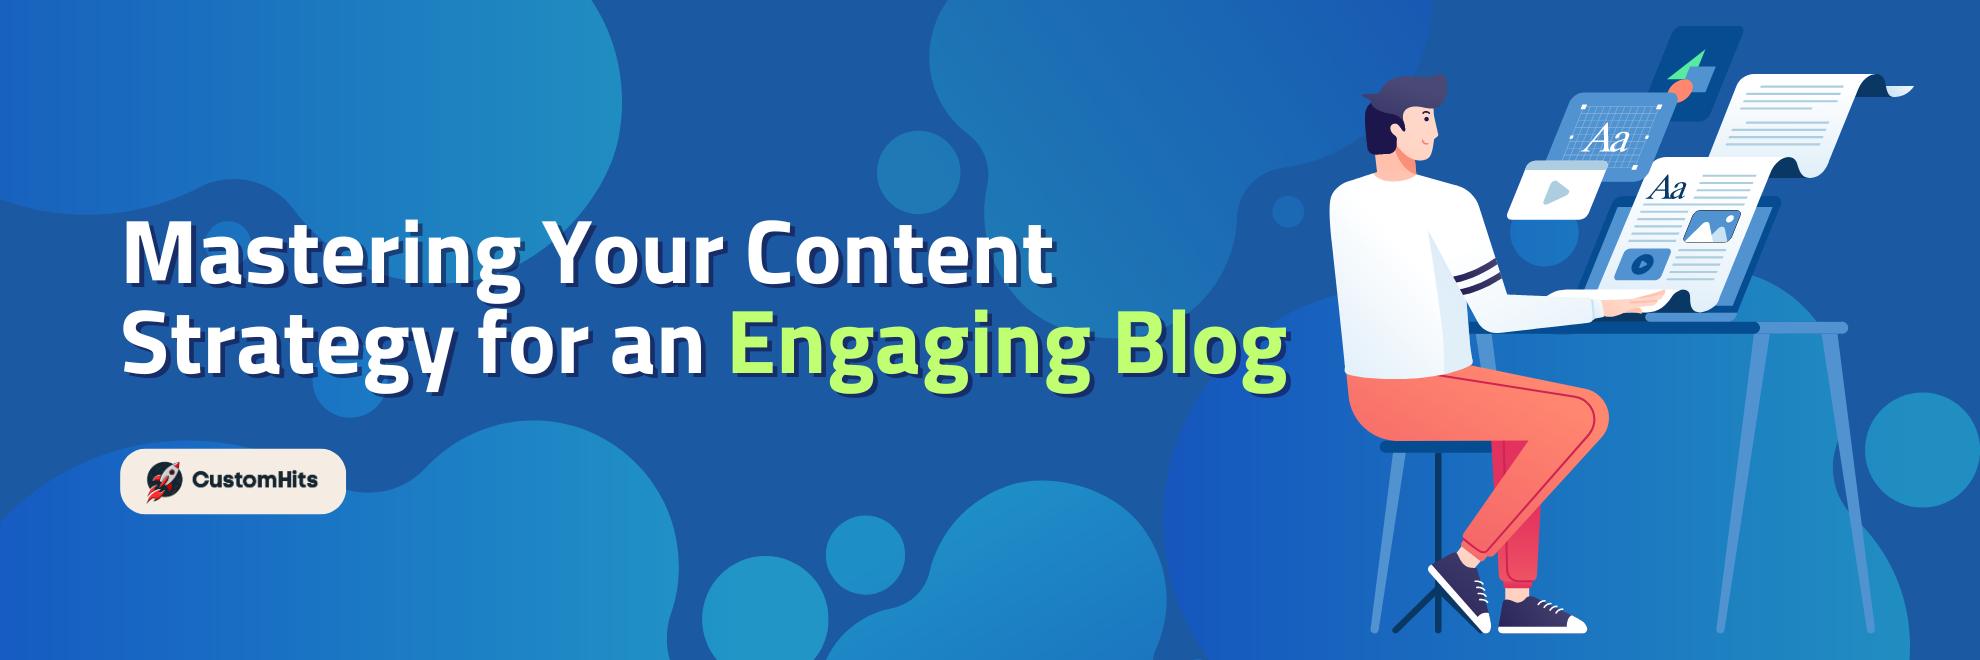 Mastering Your Content Strategy for an Engaging Blog